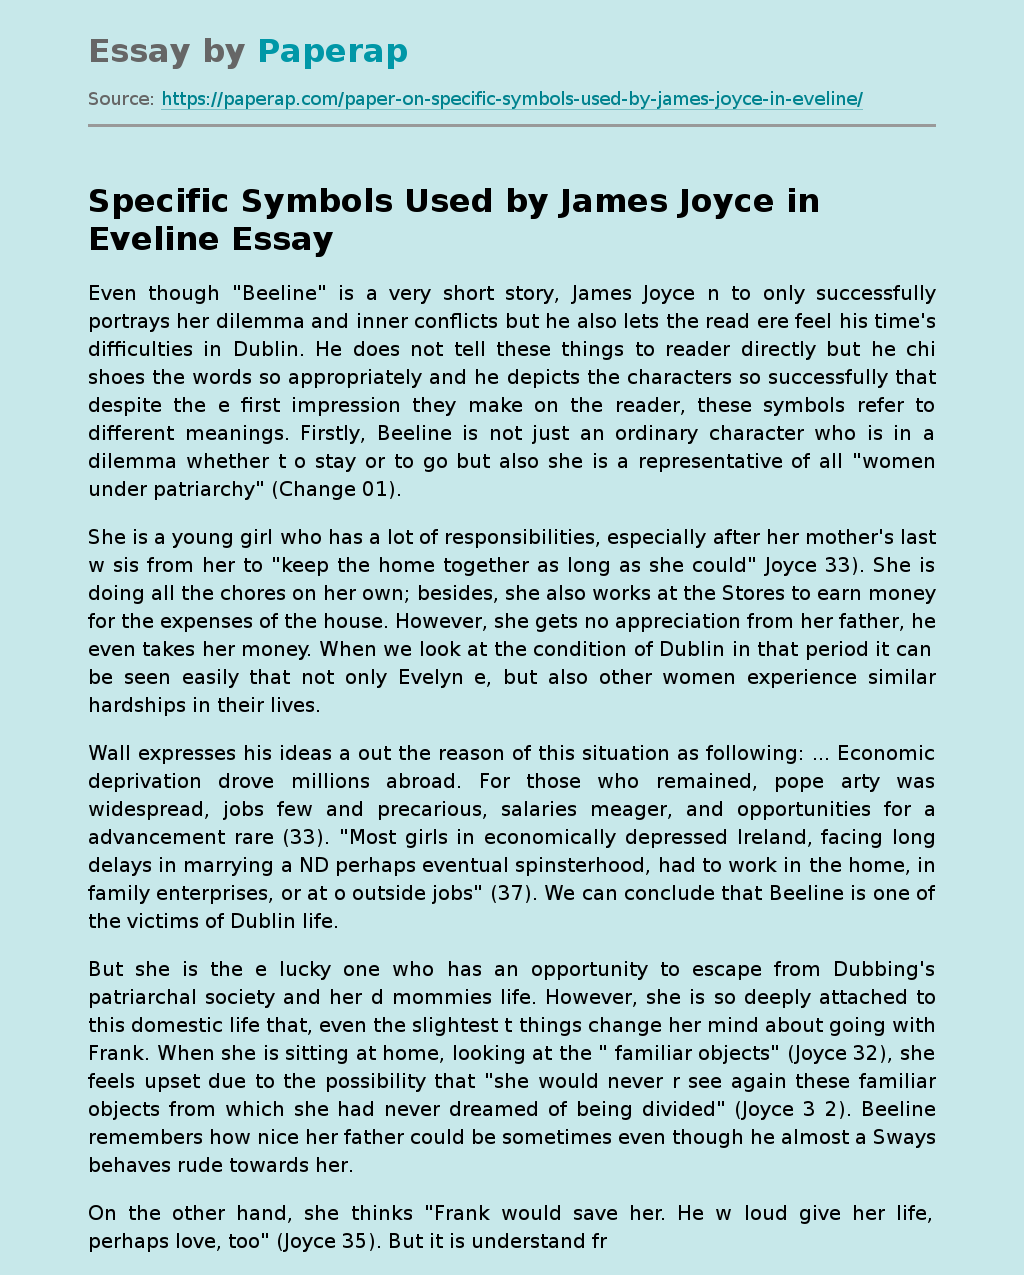 Specific Symbols Used by James Joyce in Eveline